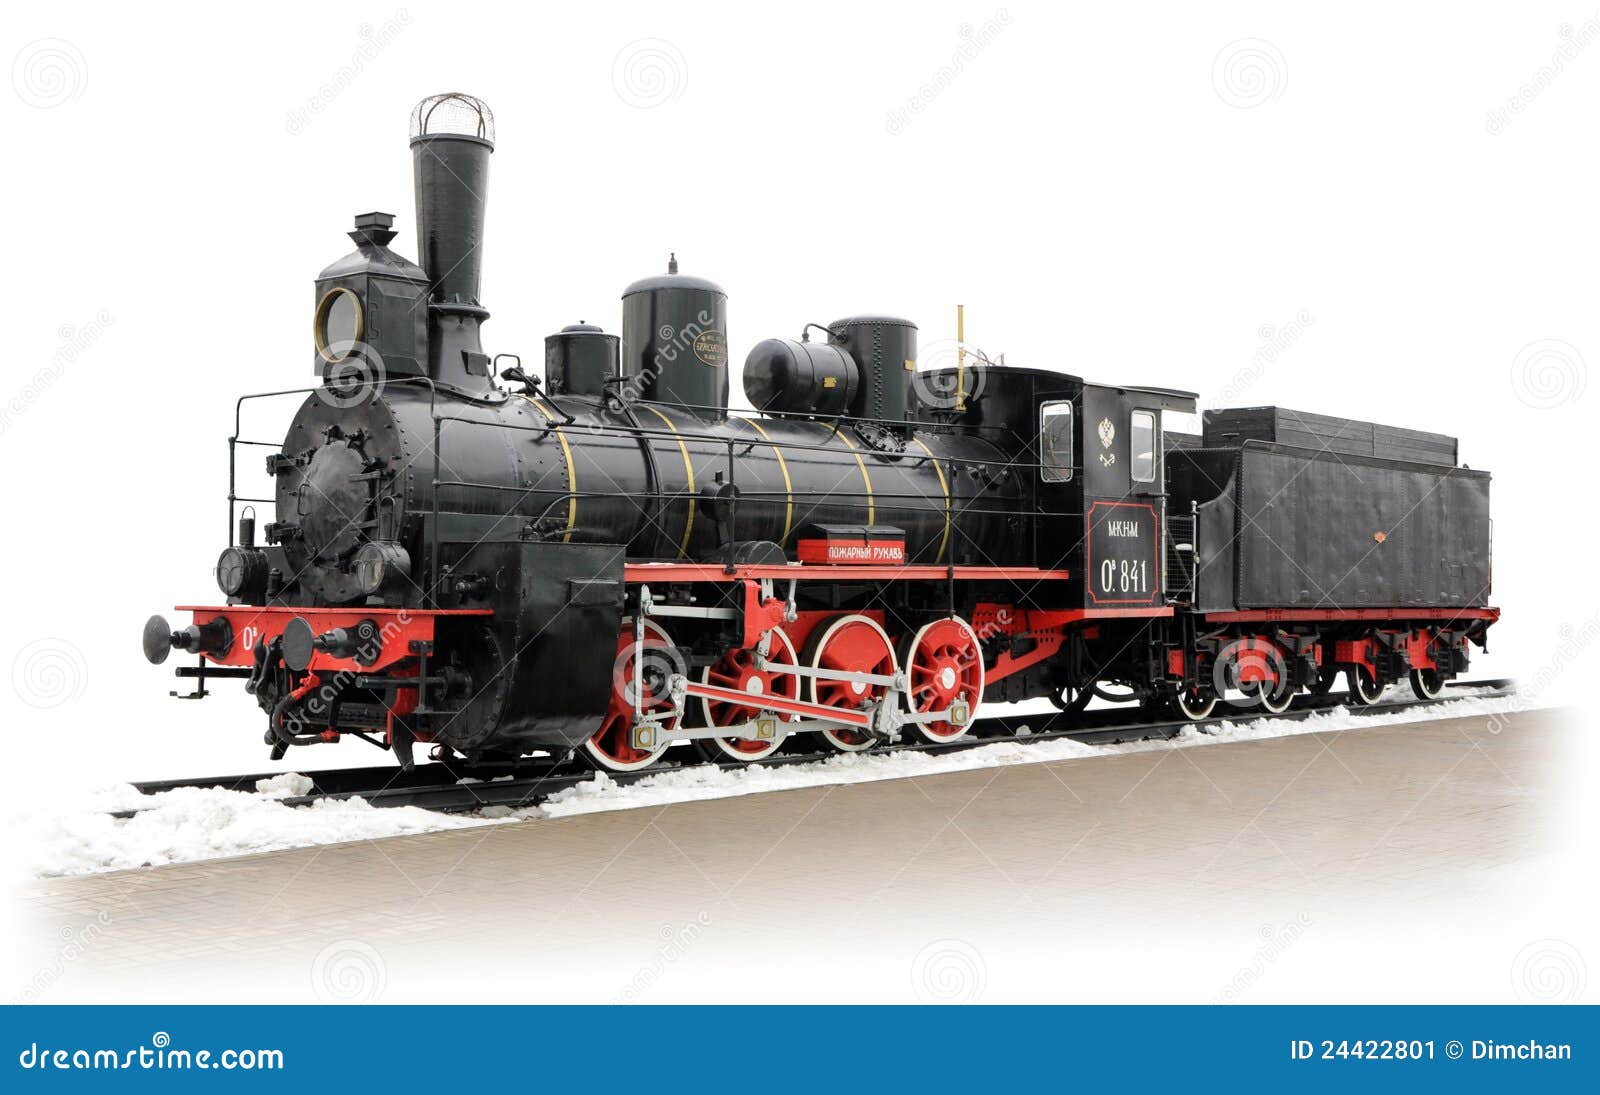 Old Russian Steam Locomotive Stock Image - Image: 24422801